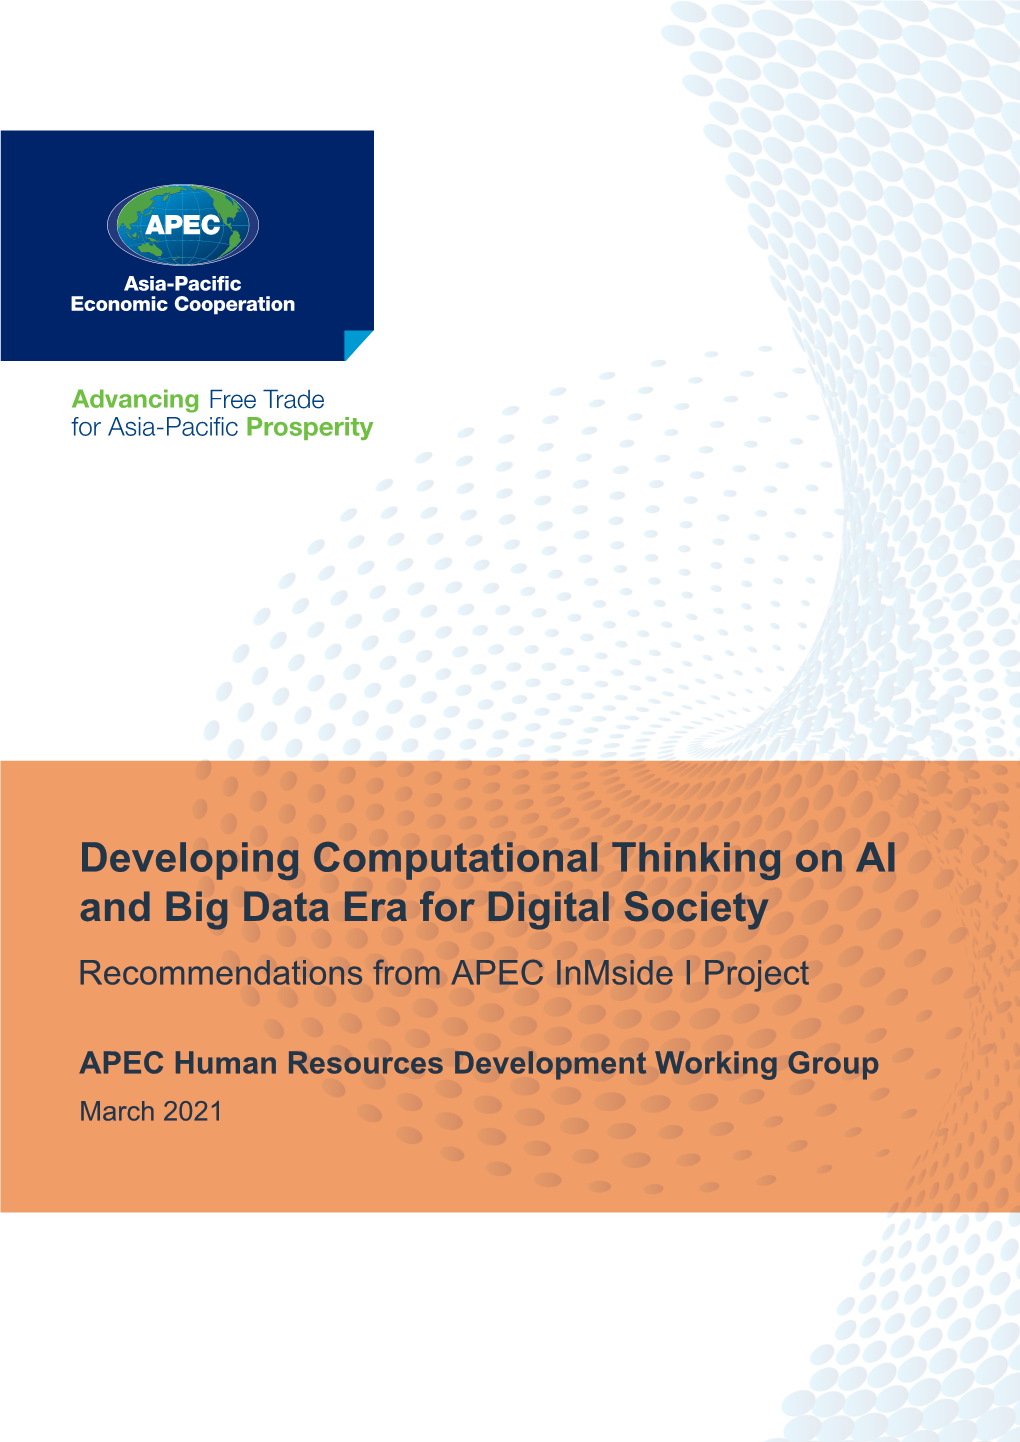 Developing Computational Thinking on AI and Big Data Era for Digital Society Recommendations from APEC Inmside I Project